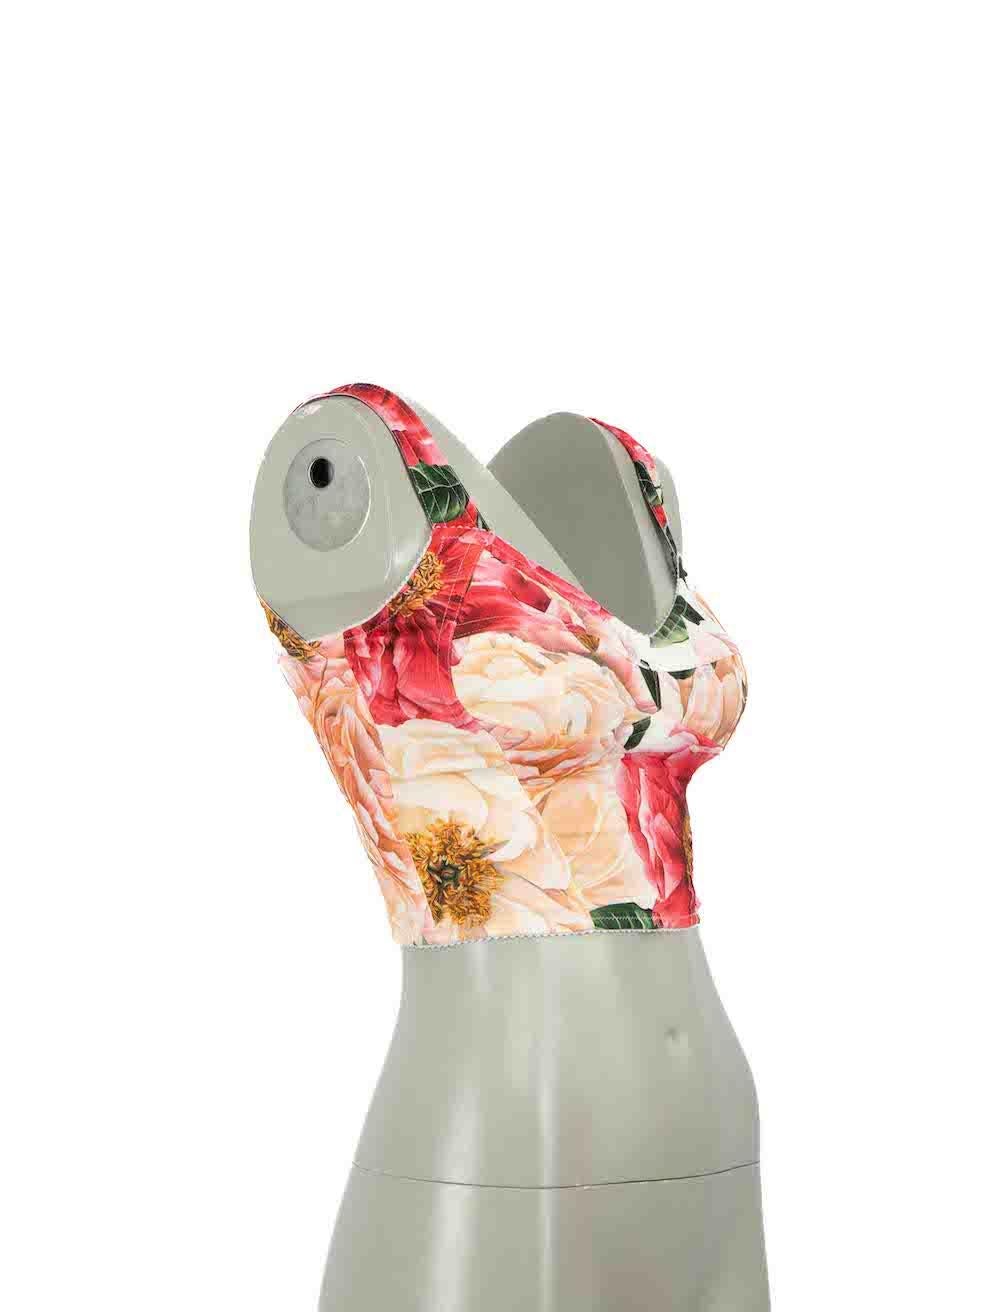 CONDITION is Never worn, with tags. No visible wear to top is evident on this new Dolce & Gabbana designer resale item.
 
Details
Pink
Viscose
Bustier top
Cropped
Sleeveless
V-neck
Floral pattern
Boned bodice
Back zip fastening

Made in Italy
